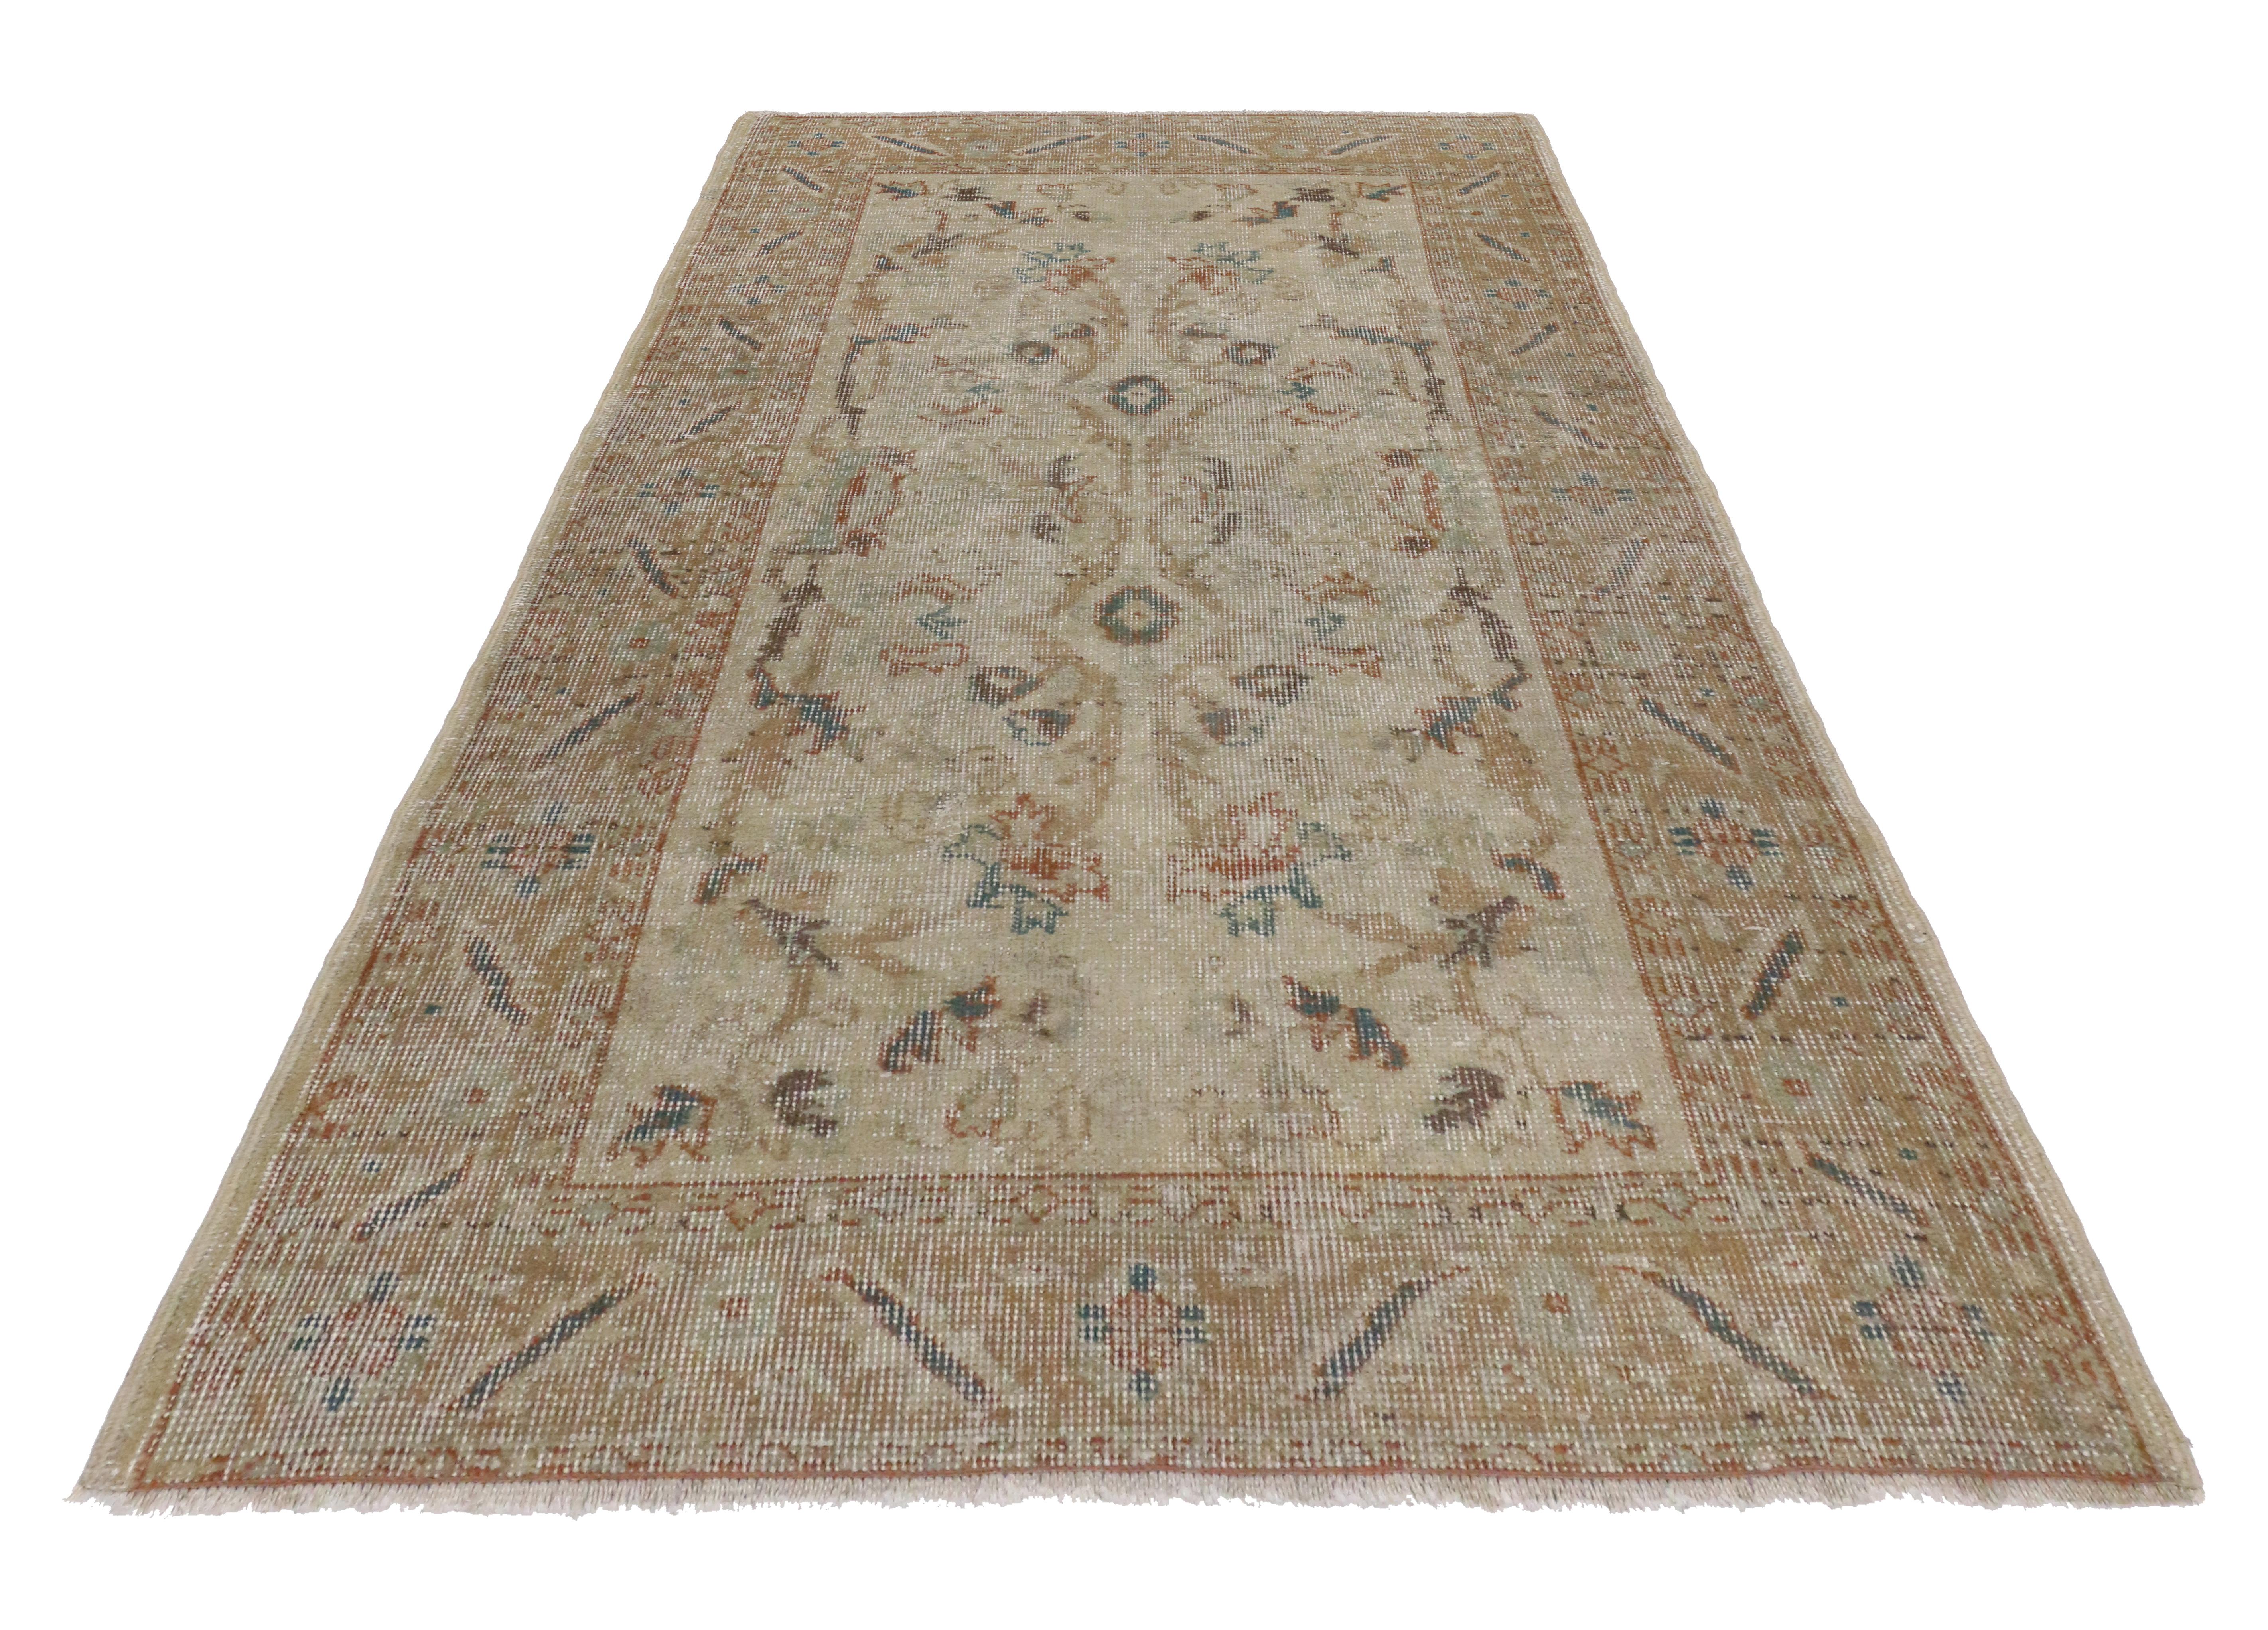 Hand-Knotted Distressed Vintage Turkish Sivas Rug with Rustic Farmhouse Style